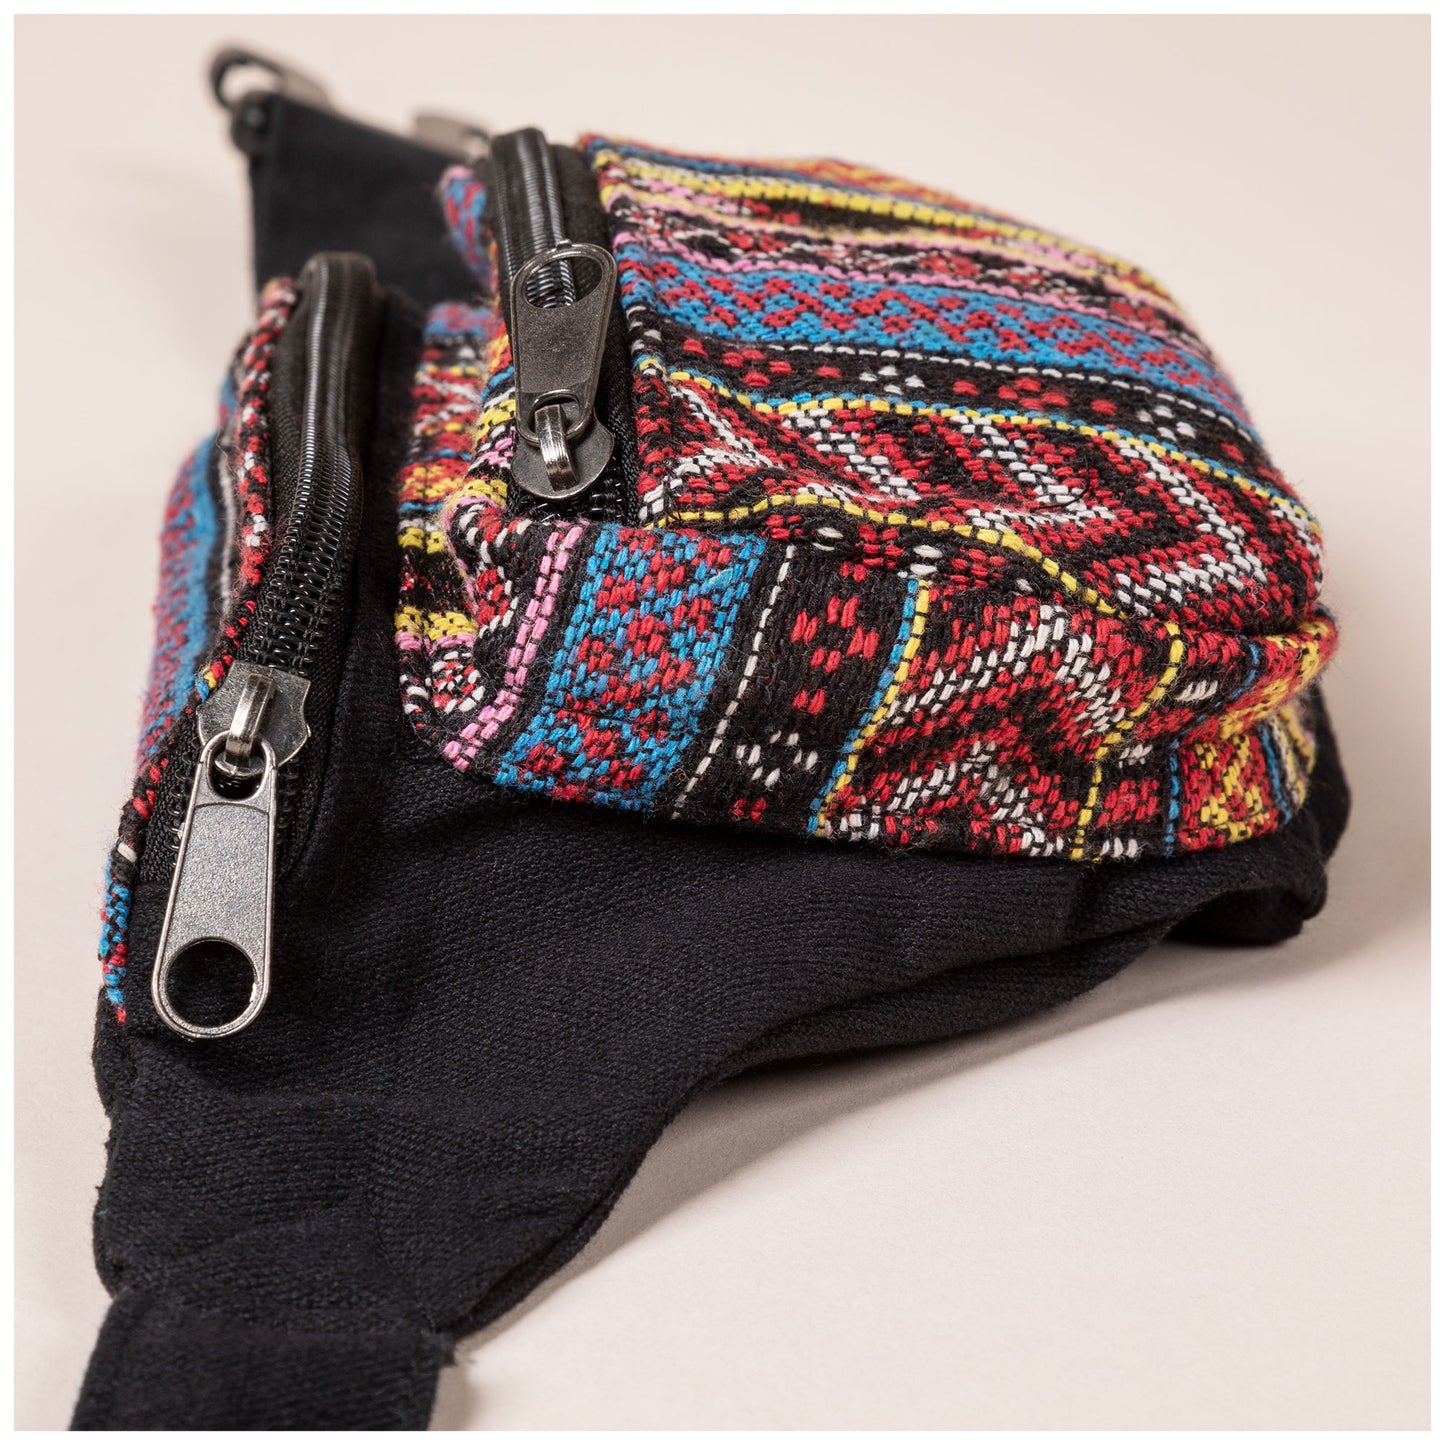 Traditional Handwoven Fanny Pack